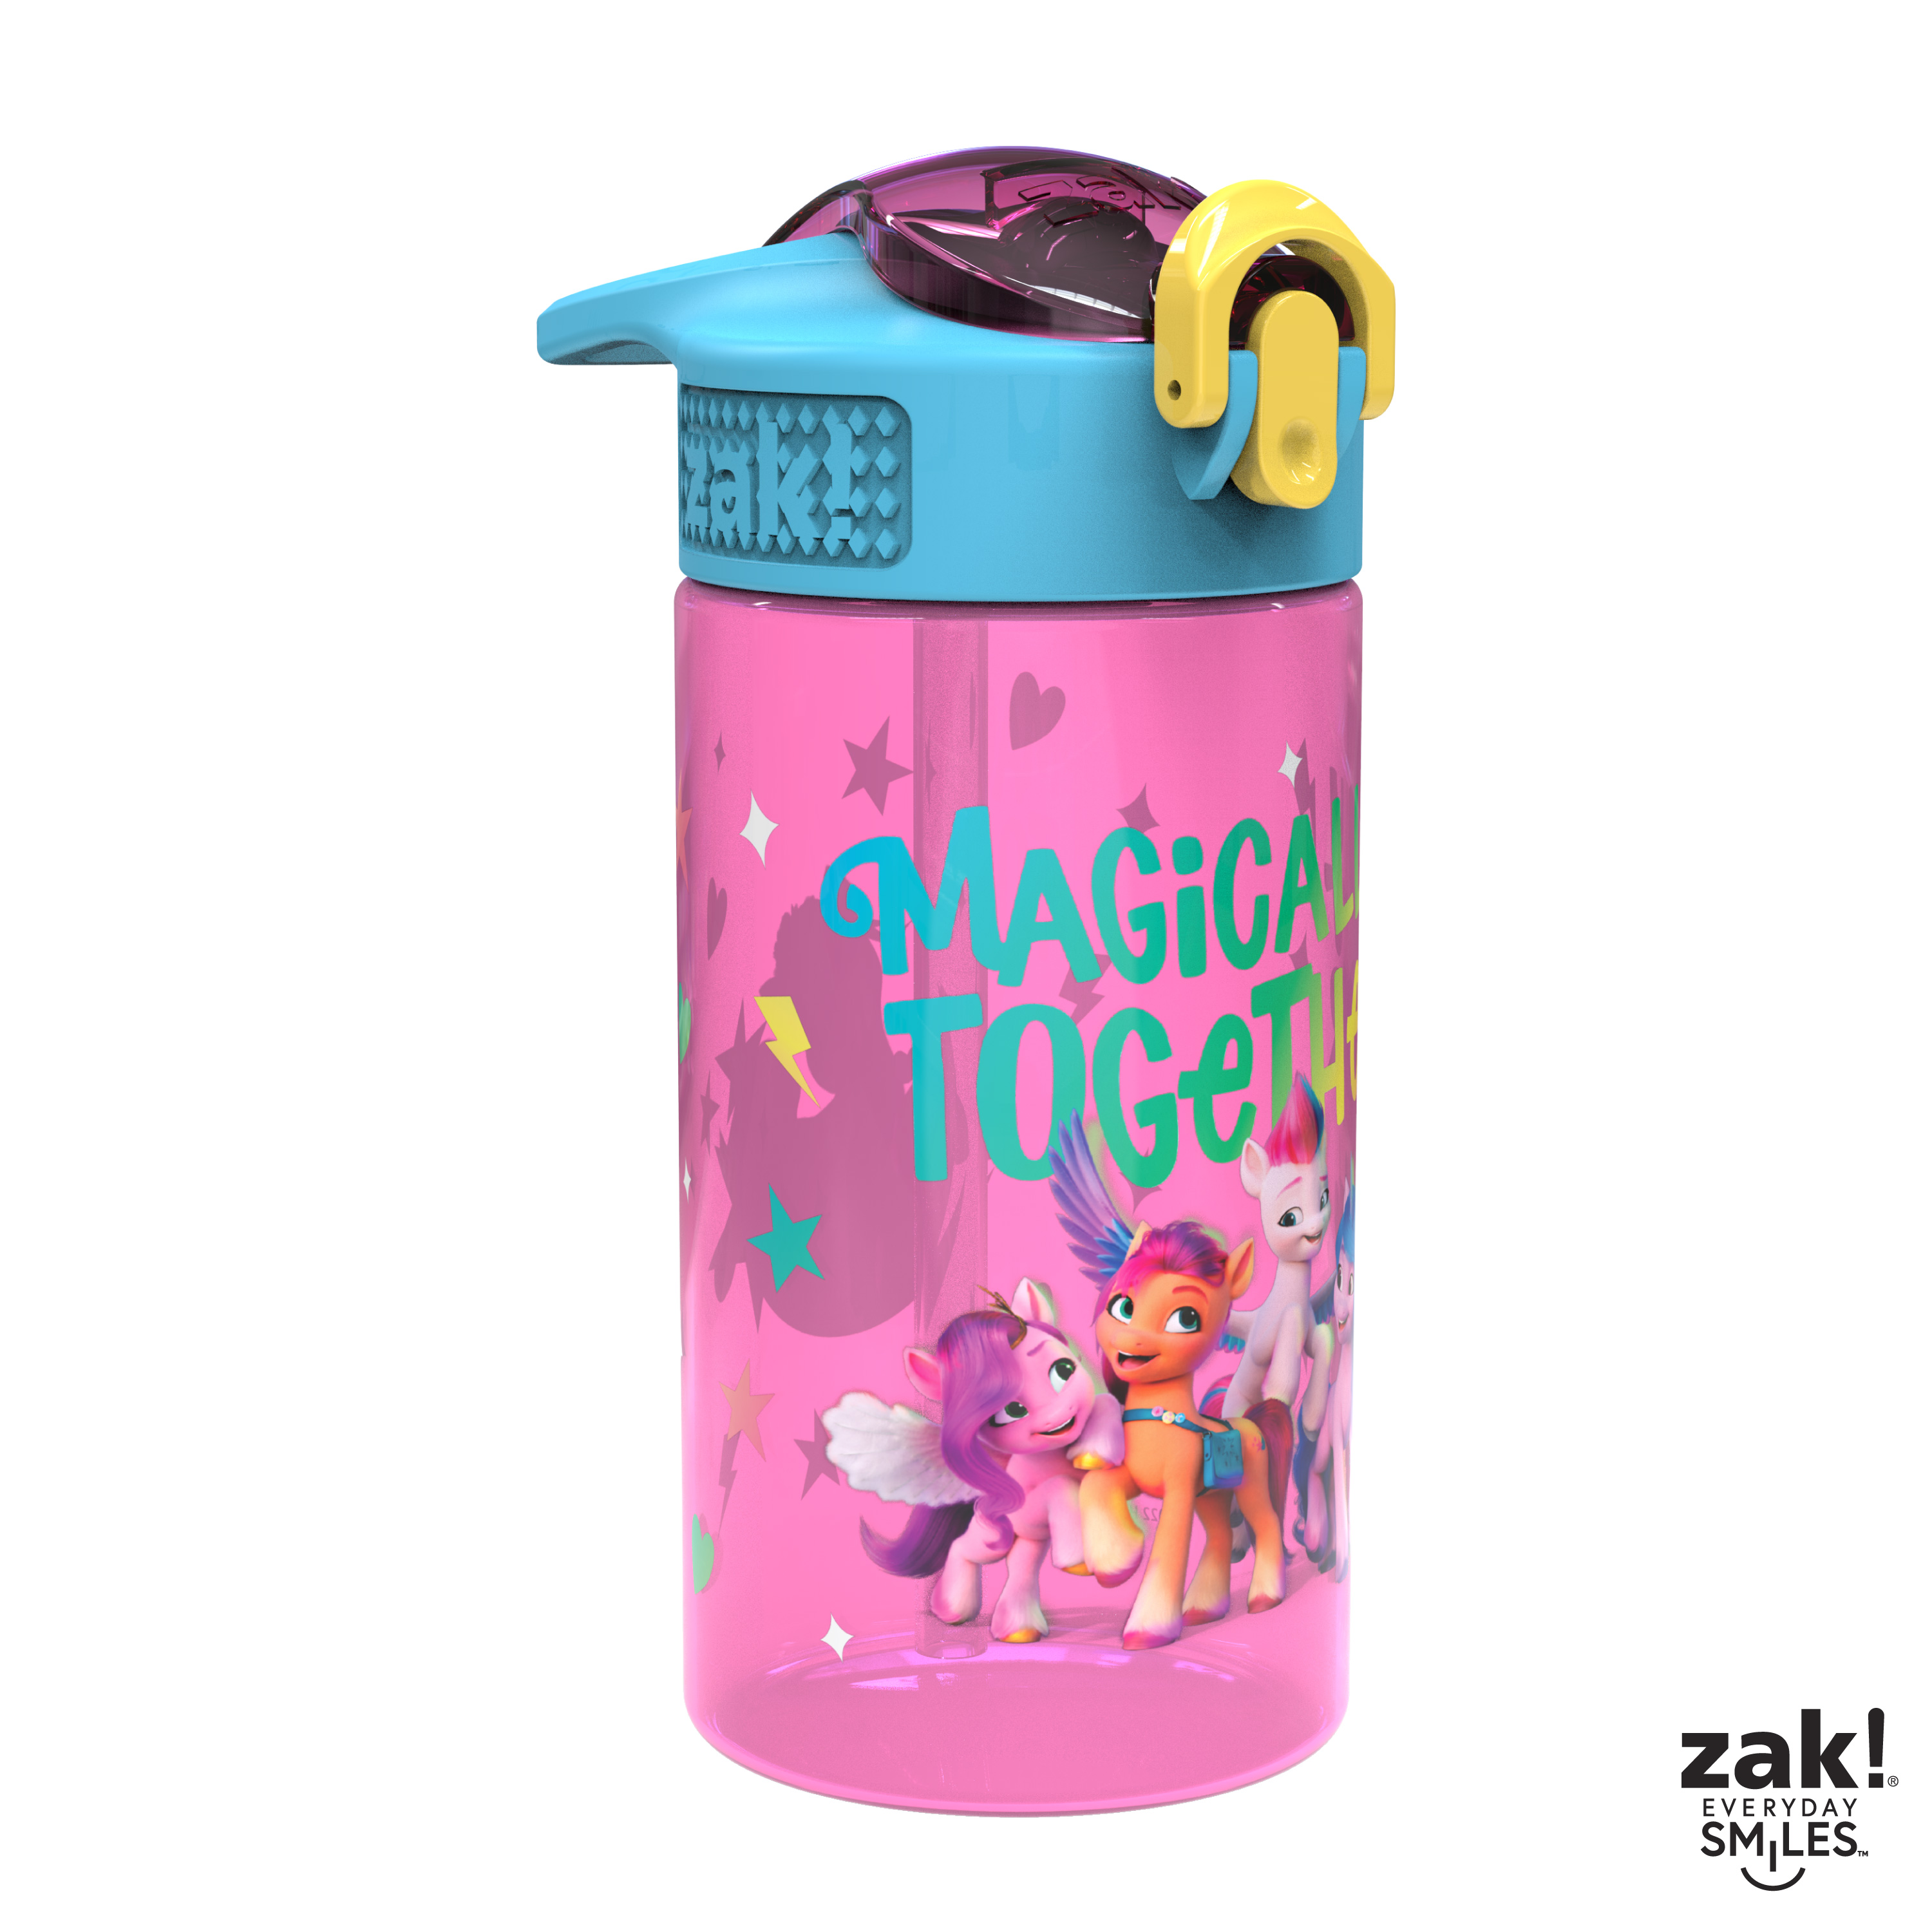 My Little Pony 16 ounce Reusable Plastic Water Bottle with Straw, Magically Together, 2-piece set slideshow image 7